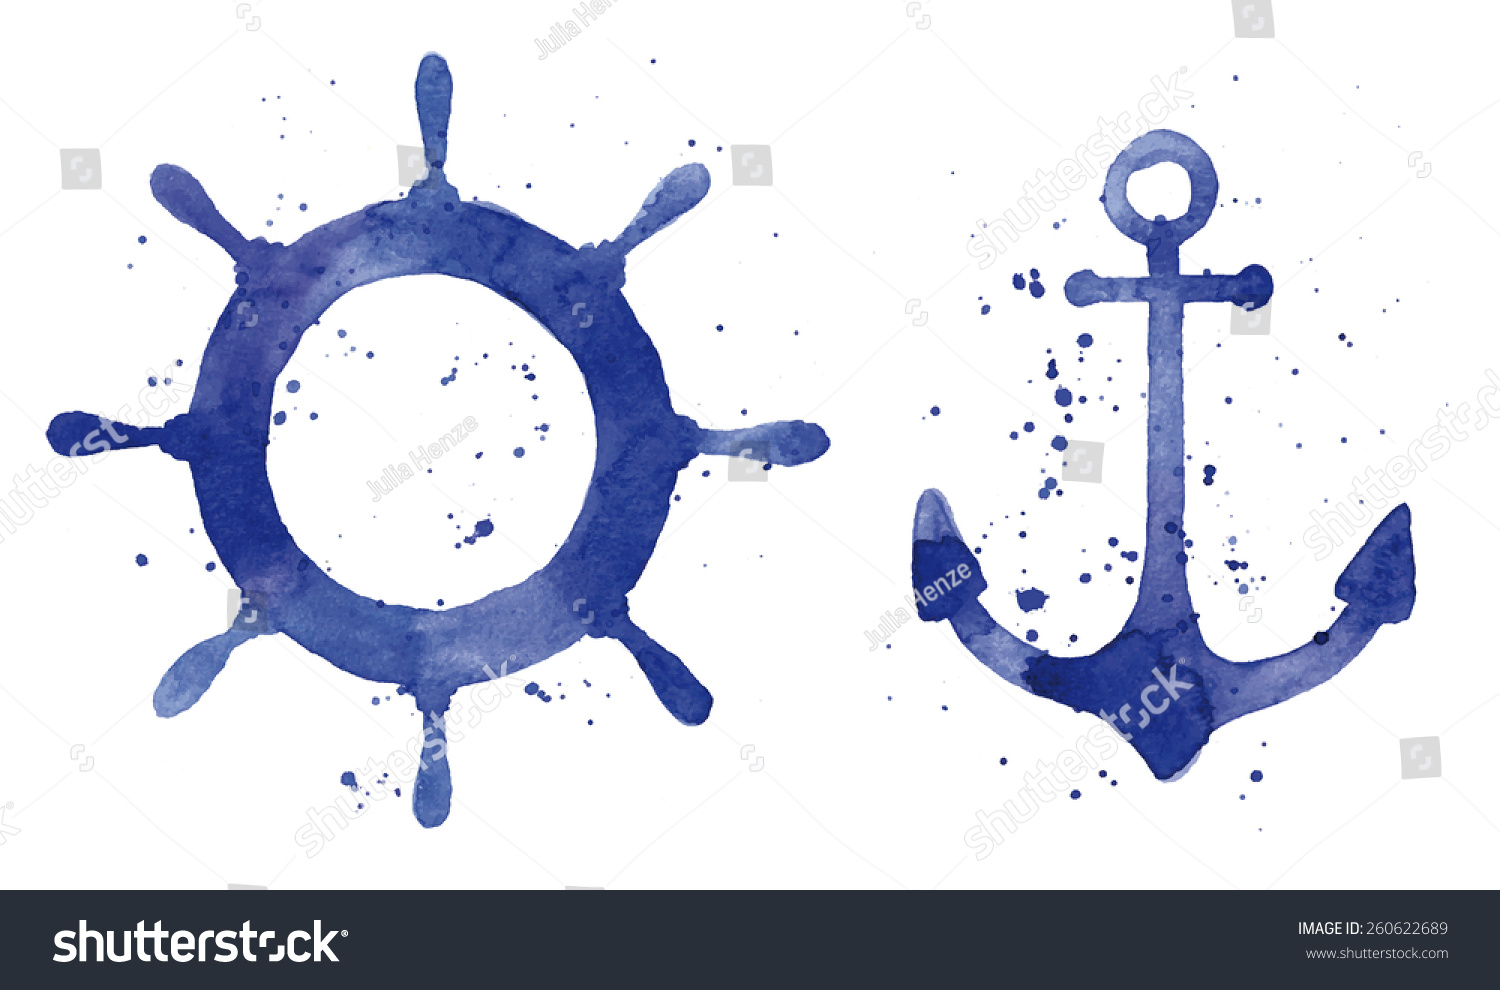 SVG of Watercolor illustration of an anchor and a steering wheel svg